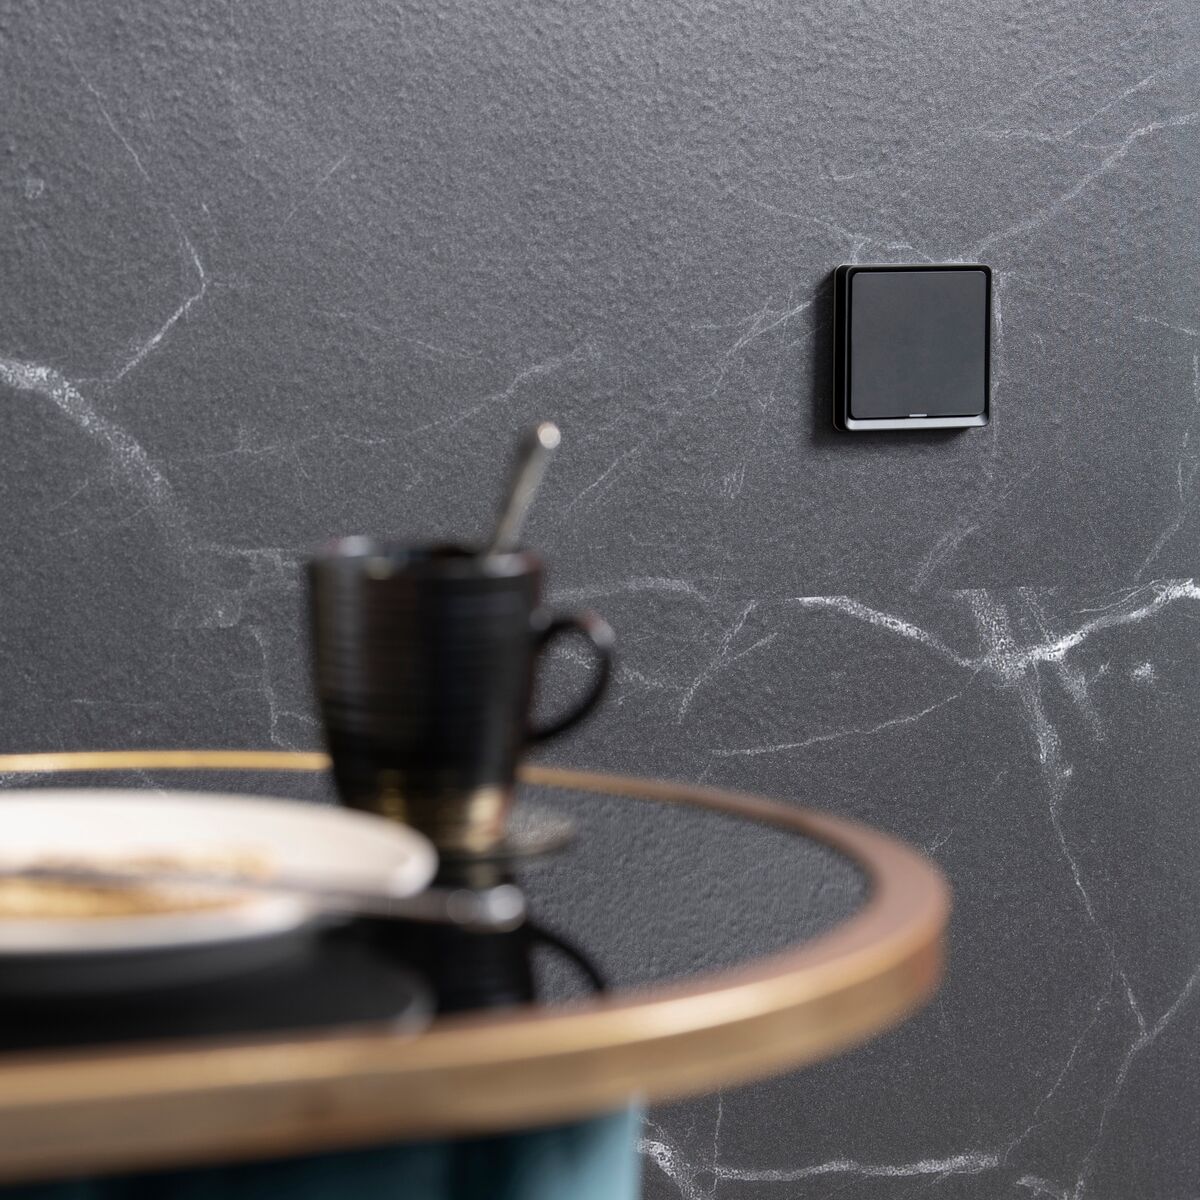 Push LE BLK - Zigbee switch -  Ambiance Image of Push LE BLK mounted on wall | Marmitek